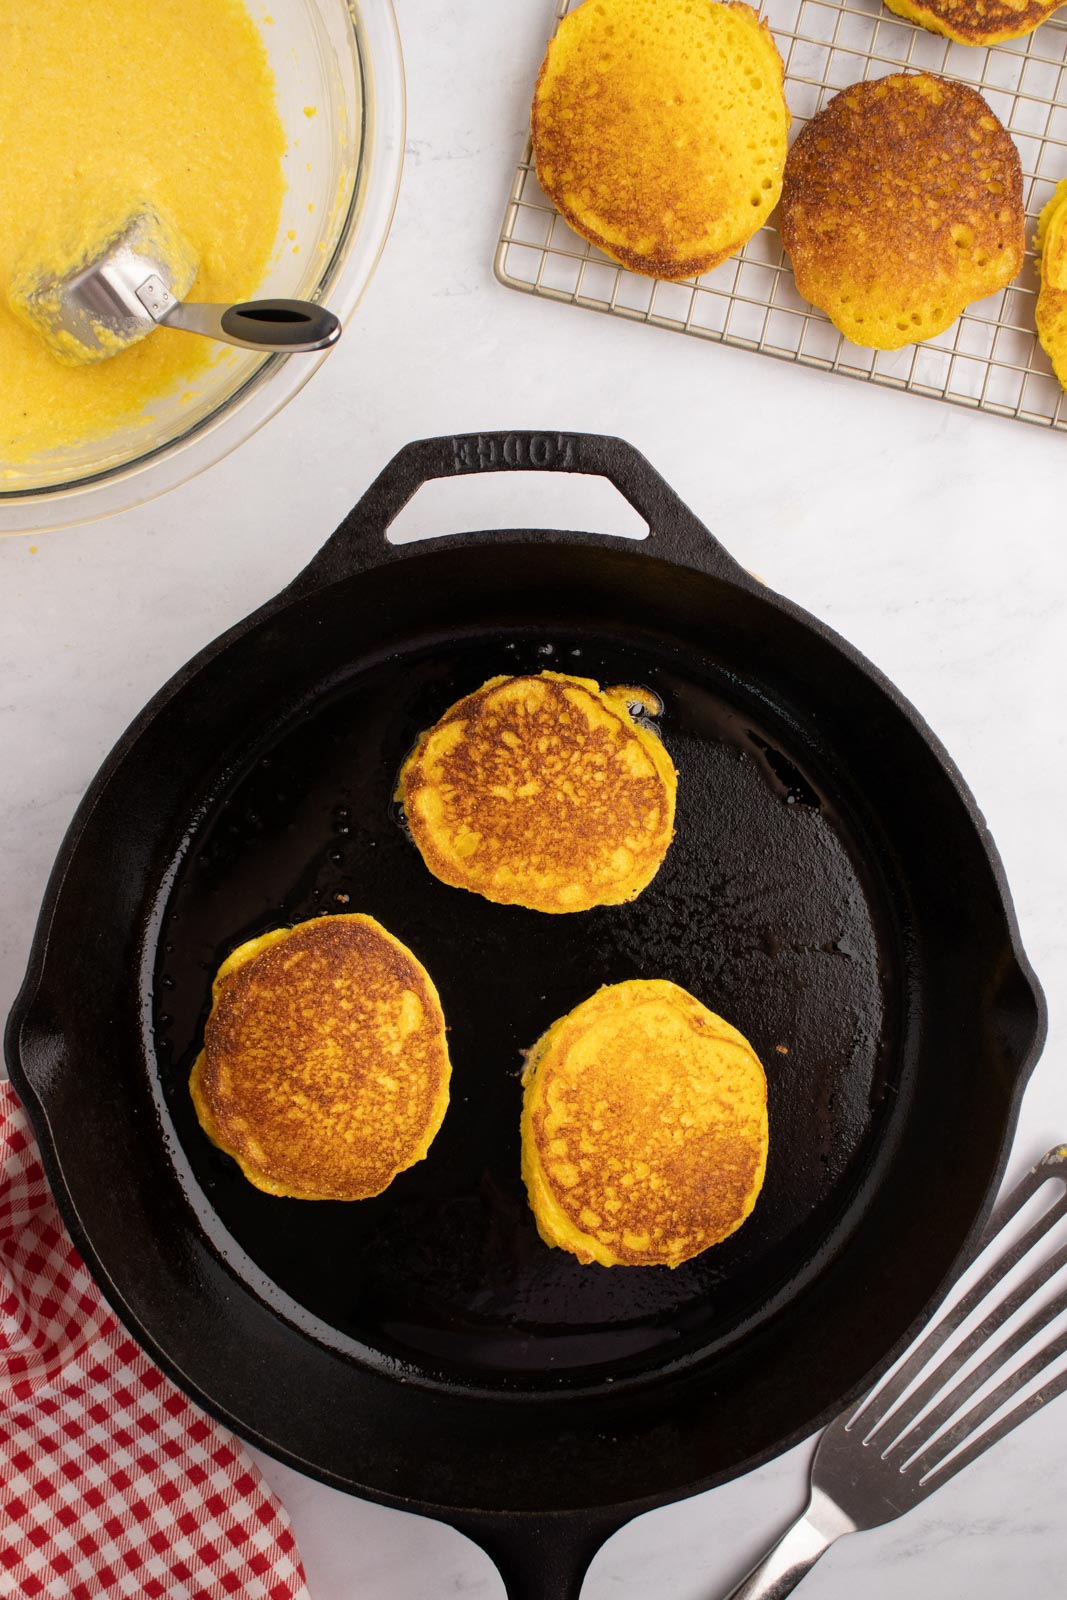 Frying cornbread cakes in a cast iron skillet.